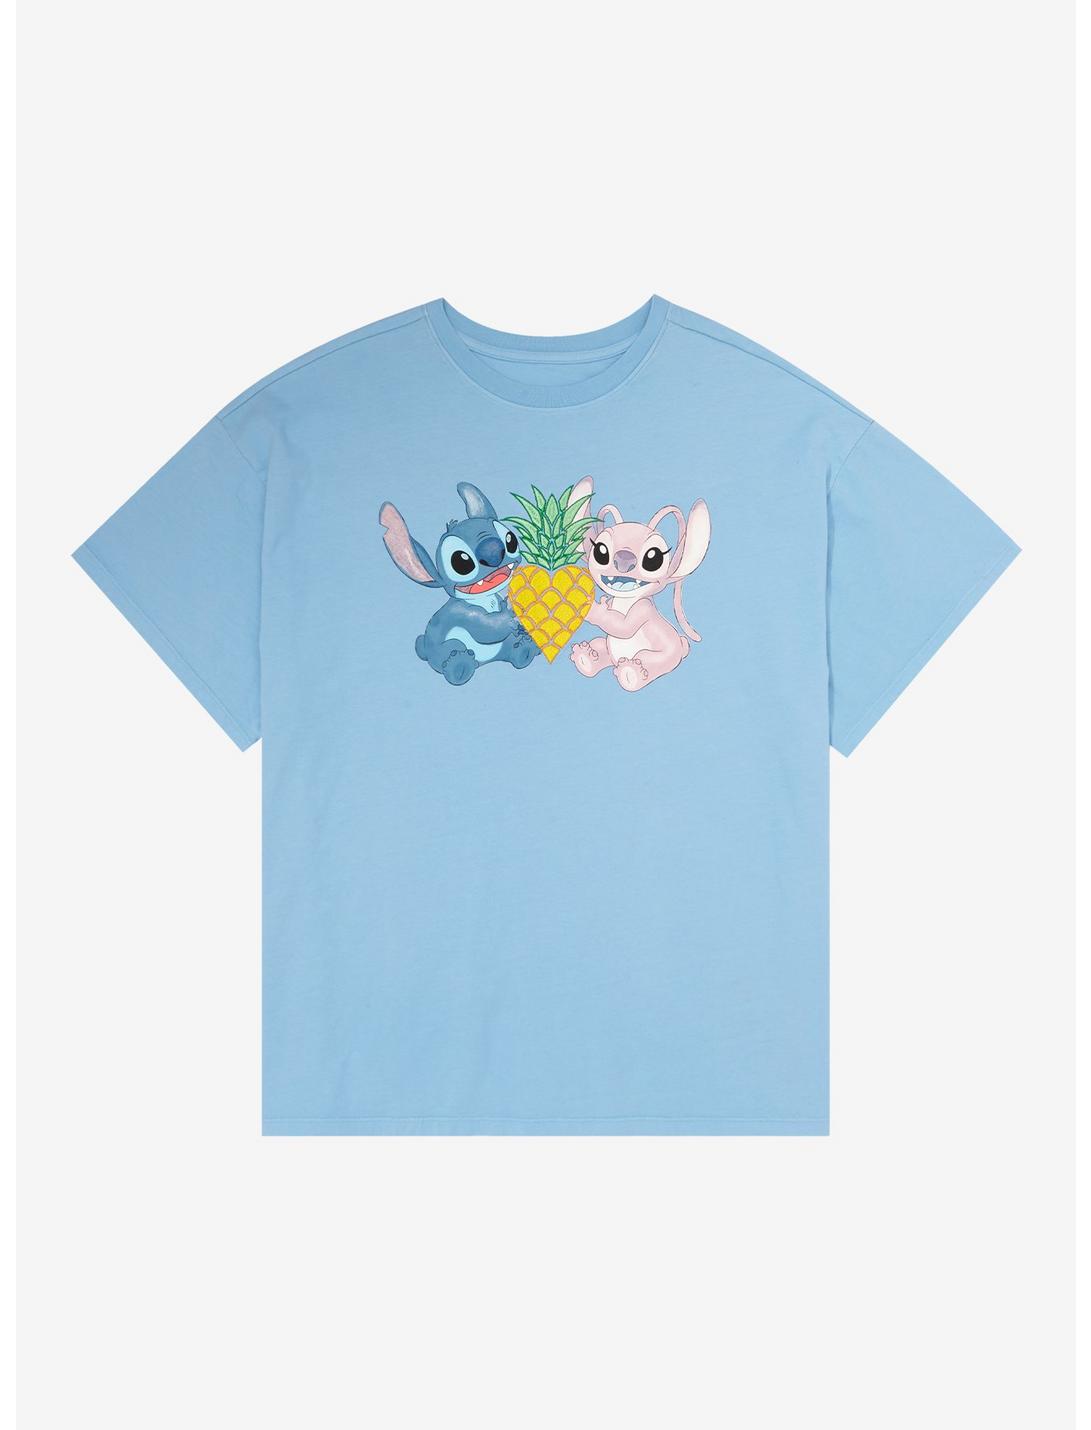 Disney Lilo & Stitch: The Series Angel & Stitch Pineapple Heart Women's Plus Size T-Shirt - BoxLunch Exclusive, LIGHT BLUE, hi-res